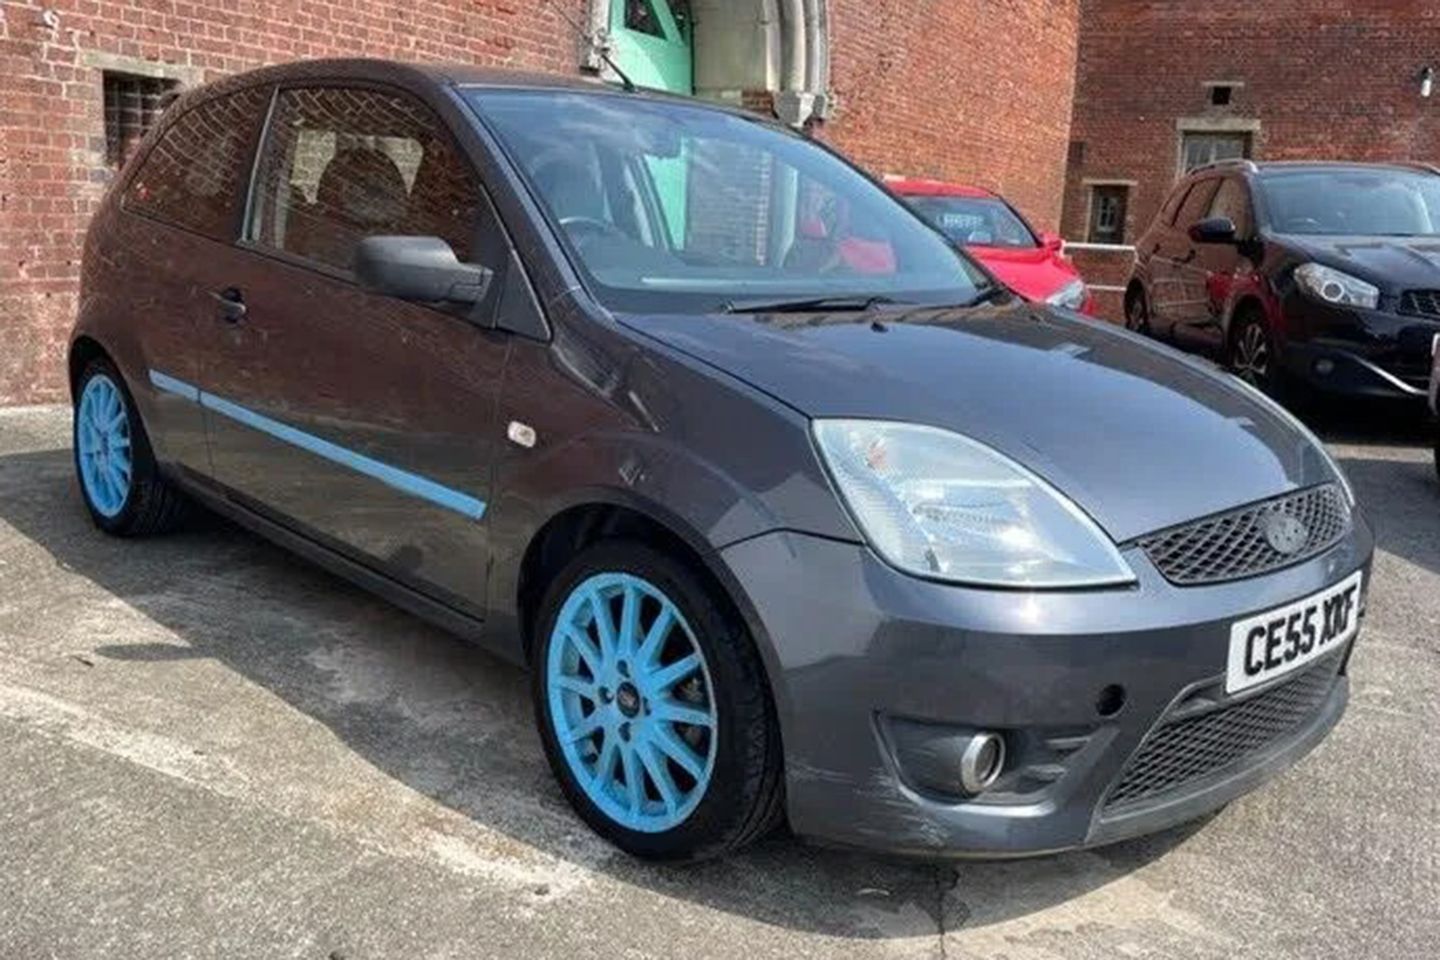 Ford Fiesta Zetec S Shed Of The Week Pistonheads Uk